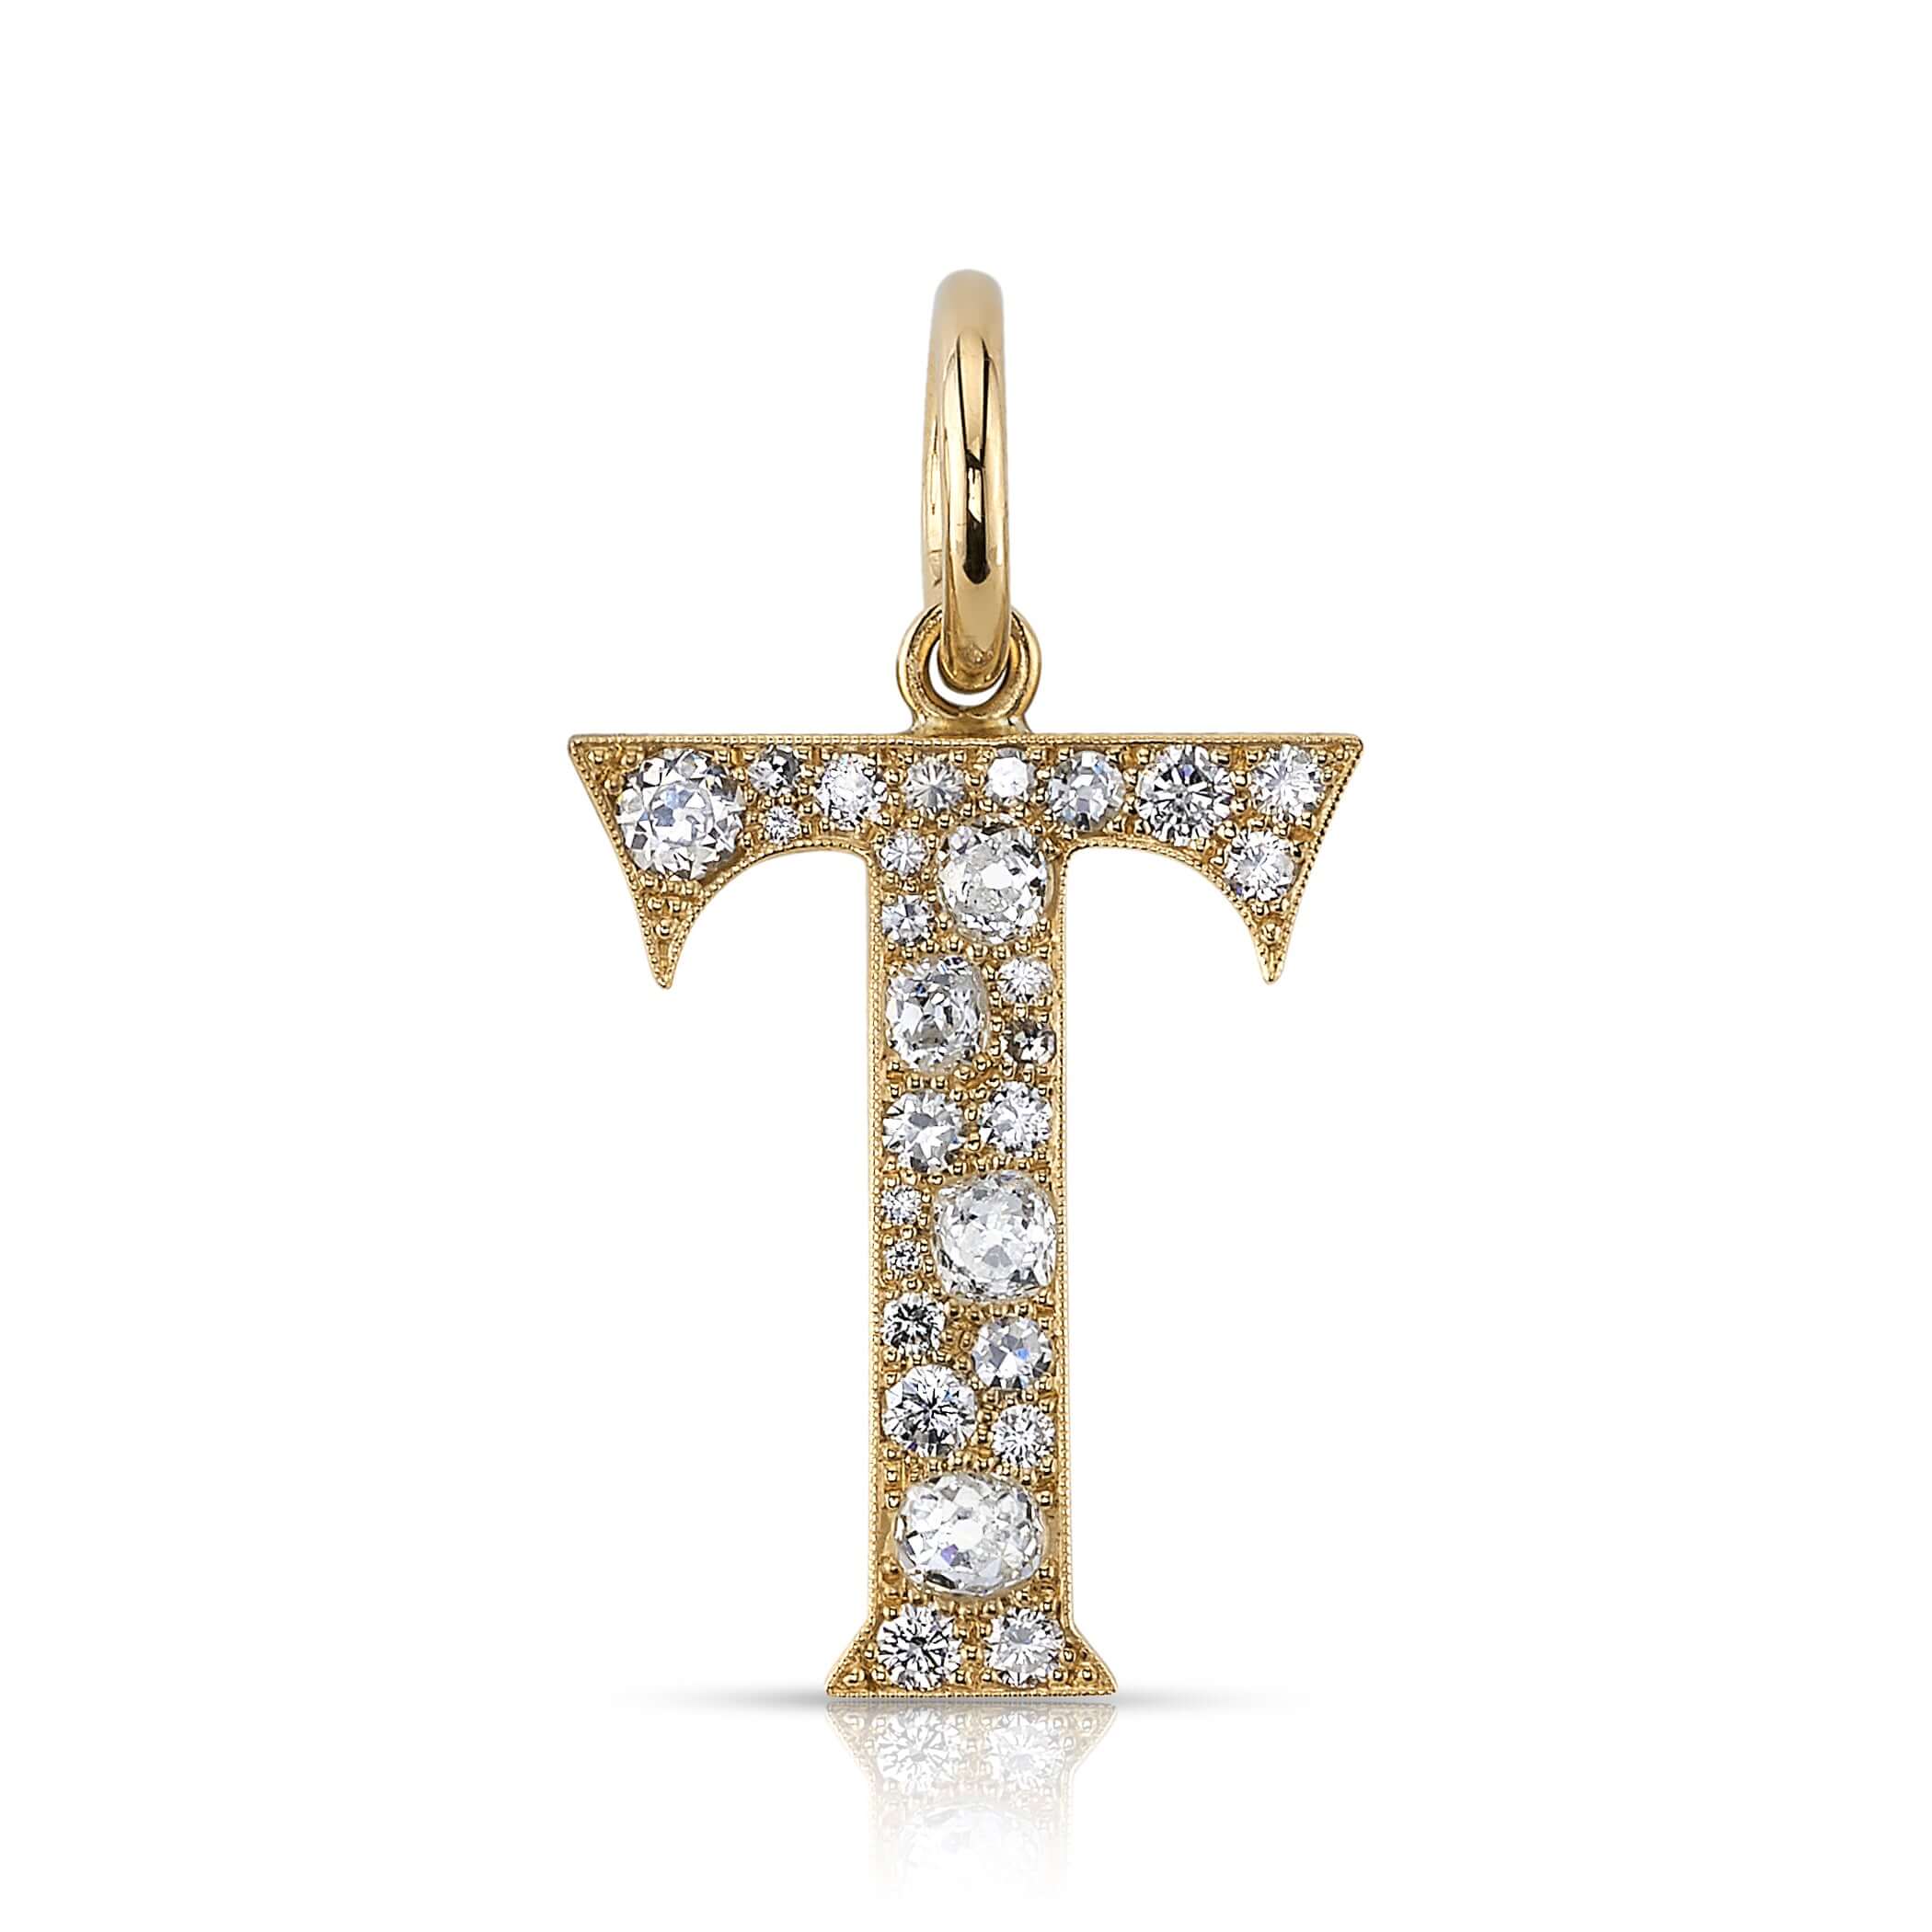 SINGLE STONE LARGE COBBLESTONE LETTERS PENDANT featuring Approximately 0.95ctw-2.75ctw varying old cut and round brilliant cut diamonds set in a handcrafted 18K yellow gold letter pendant. Letters are approximately 1" tall. Available in an oxidized or pol